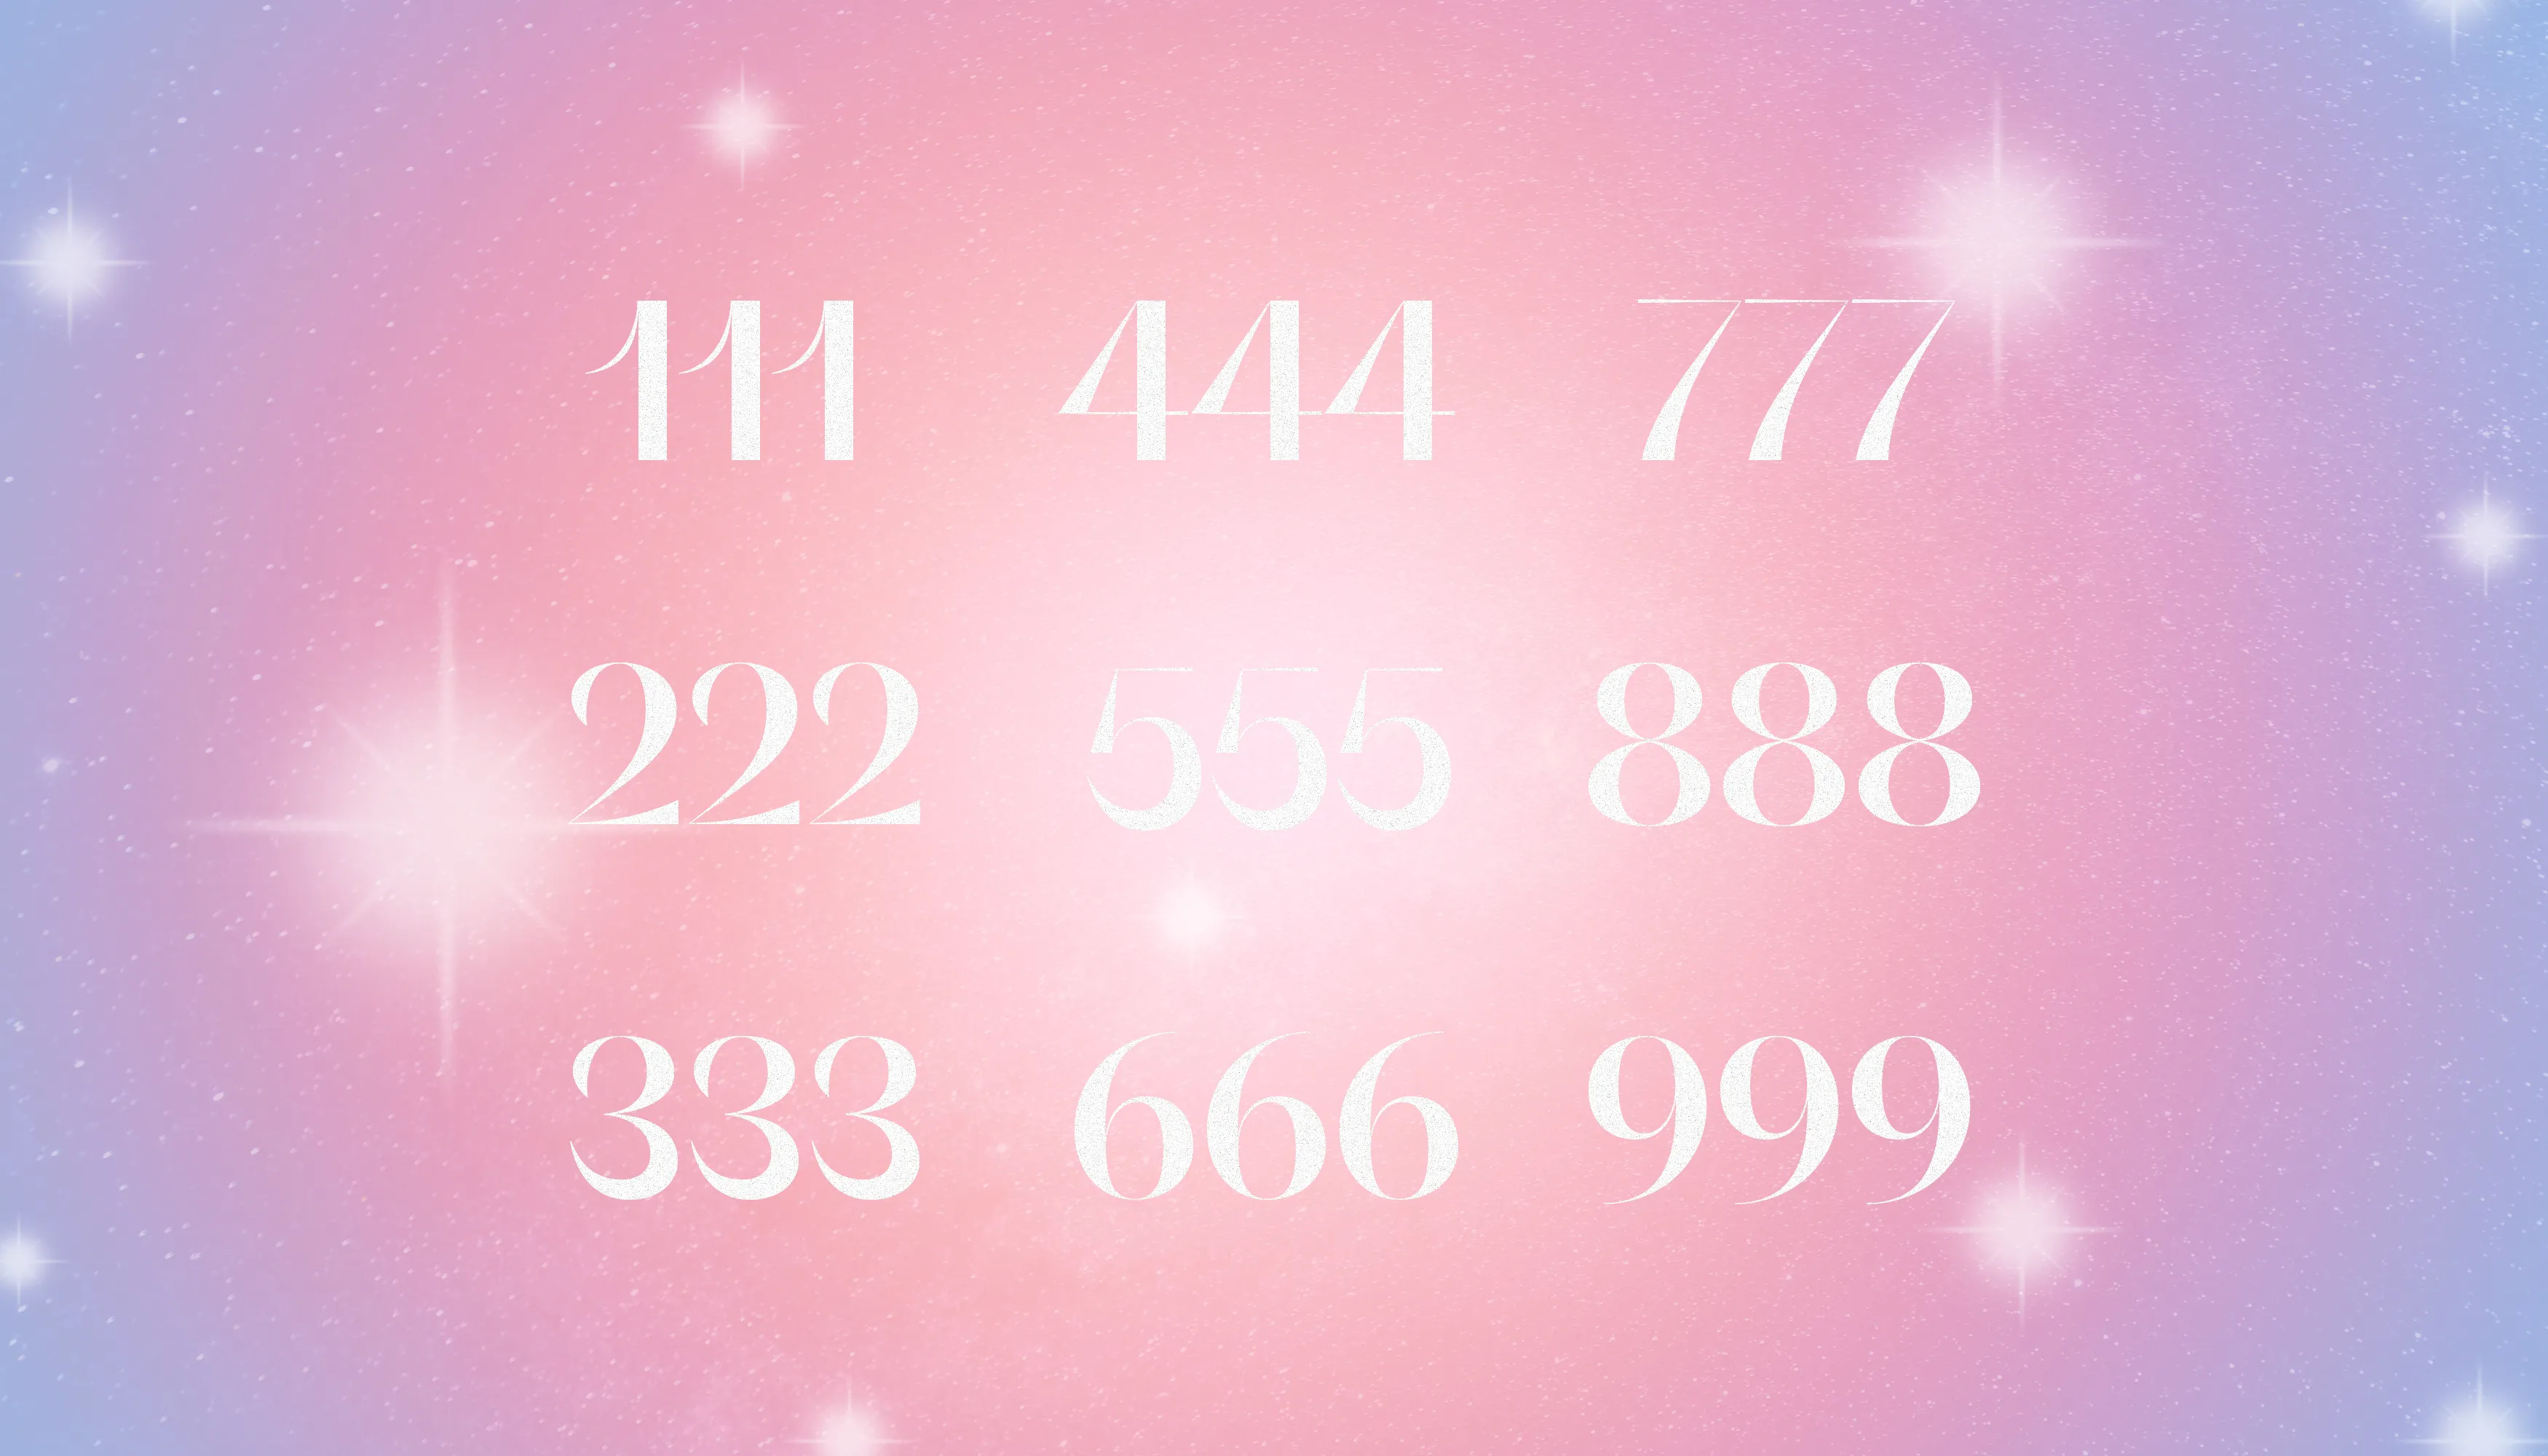 Different Angel Number Patterns